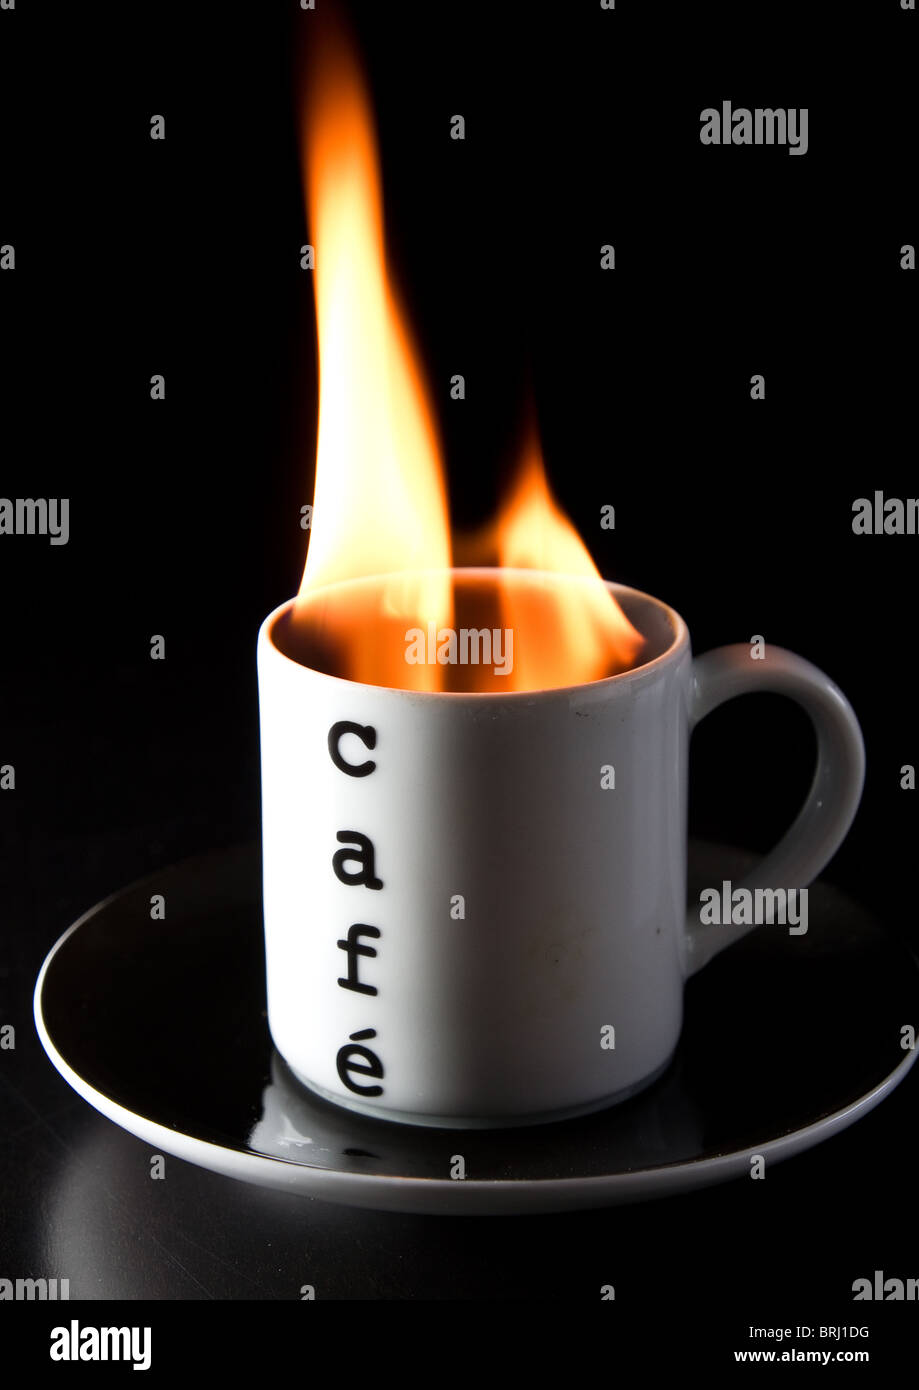 A cup of burning coffee Stock Photo